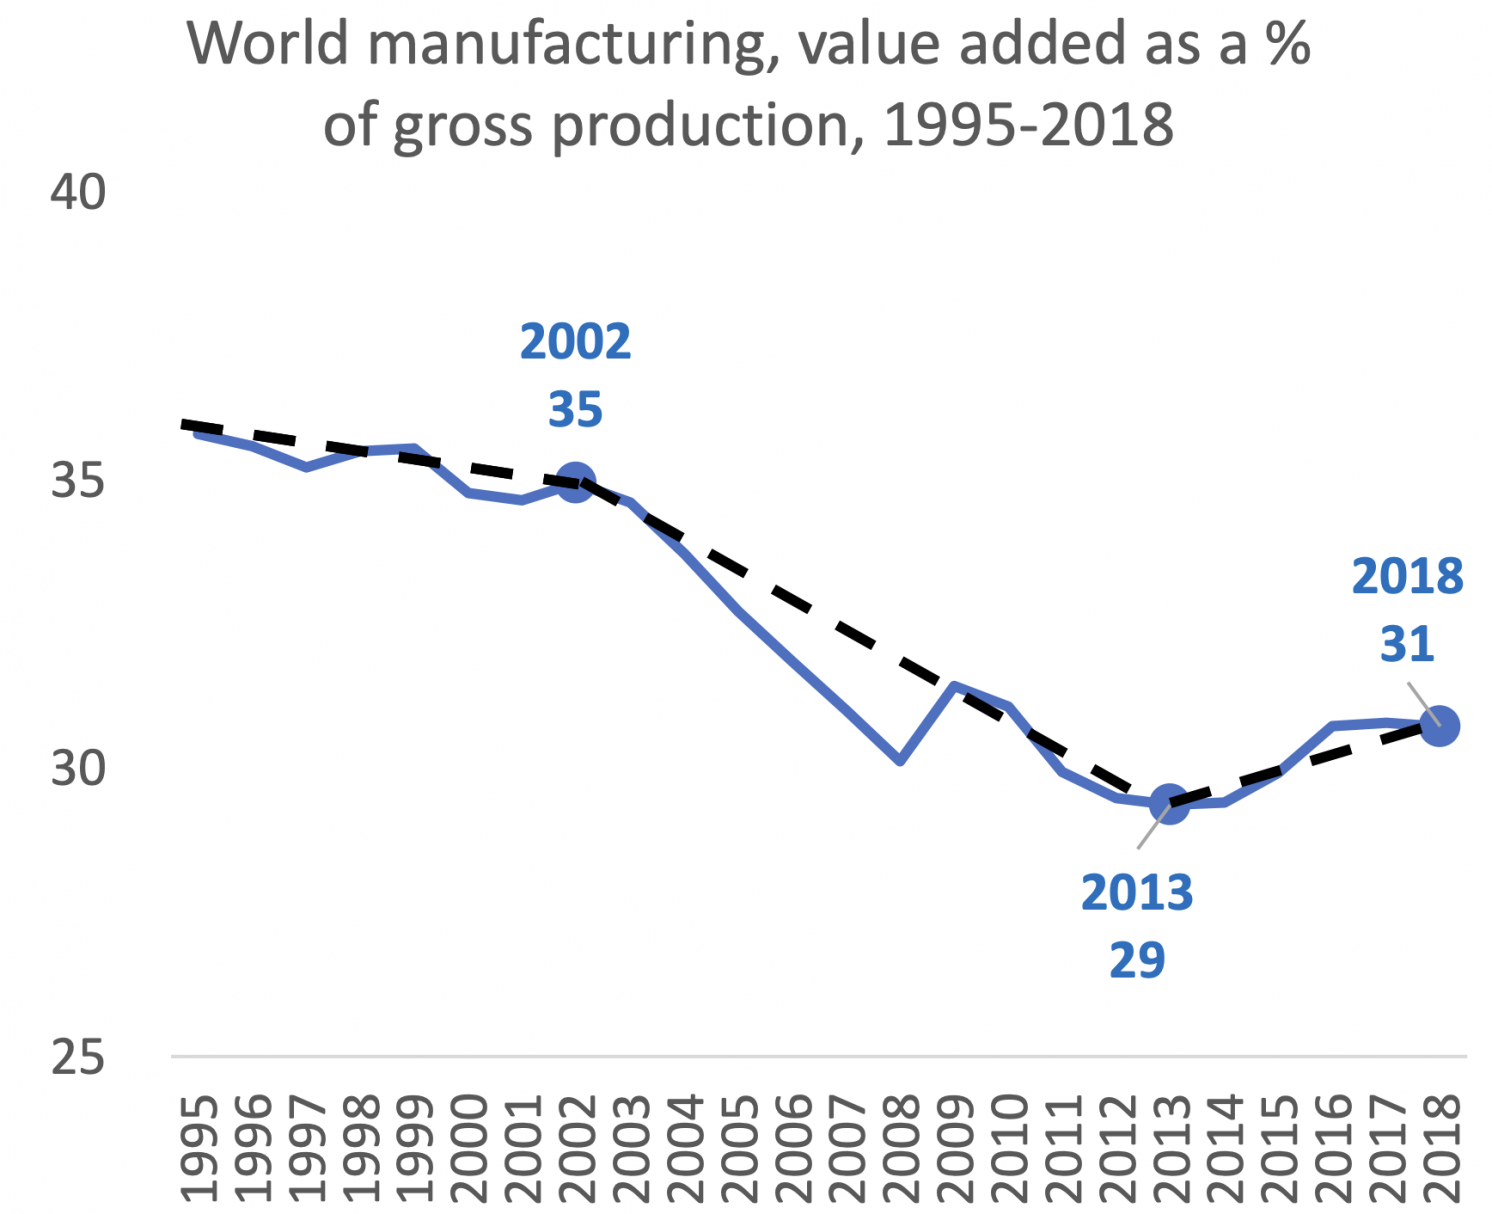 Figure 4 World manufacturing ratio of value added to gross production, 1995-2018